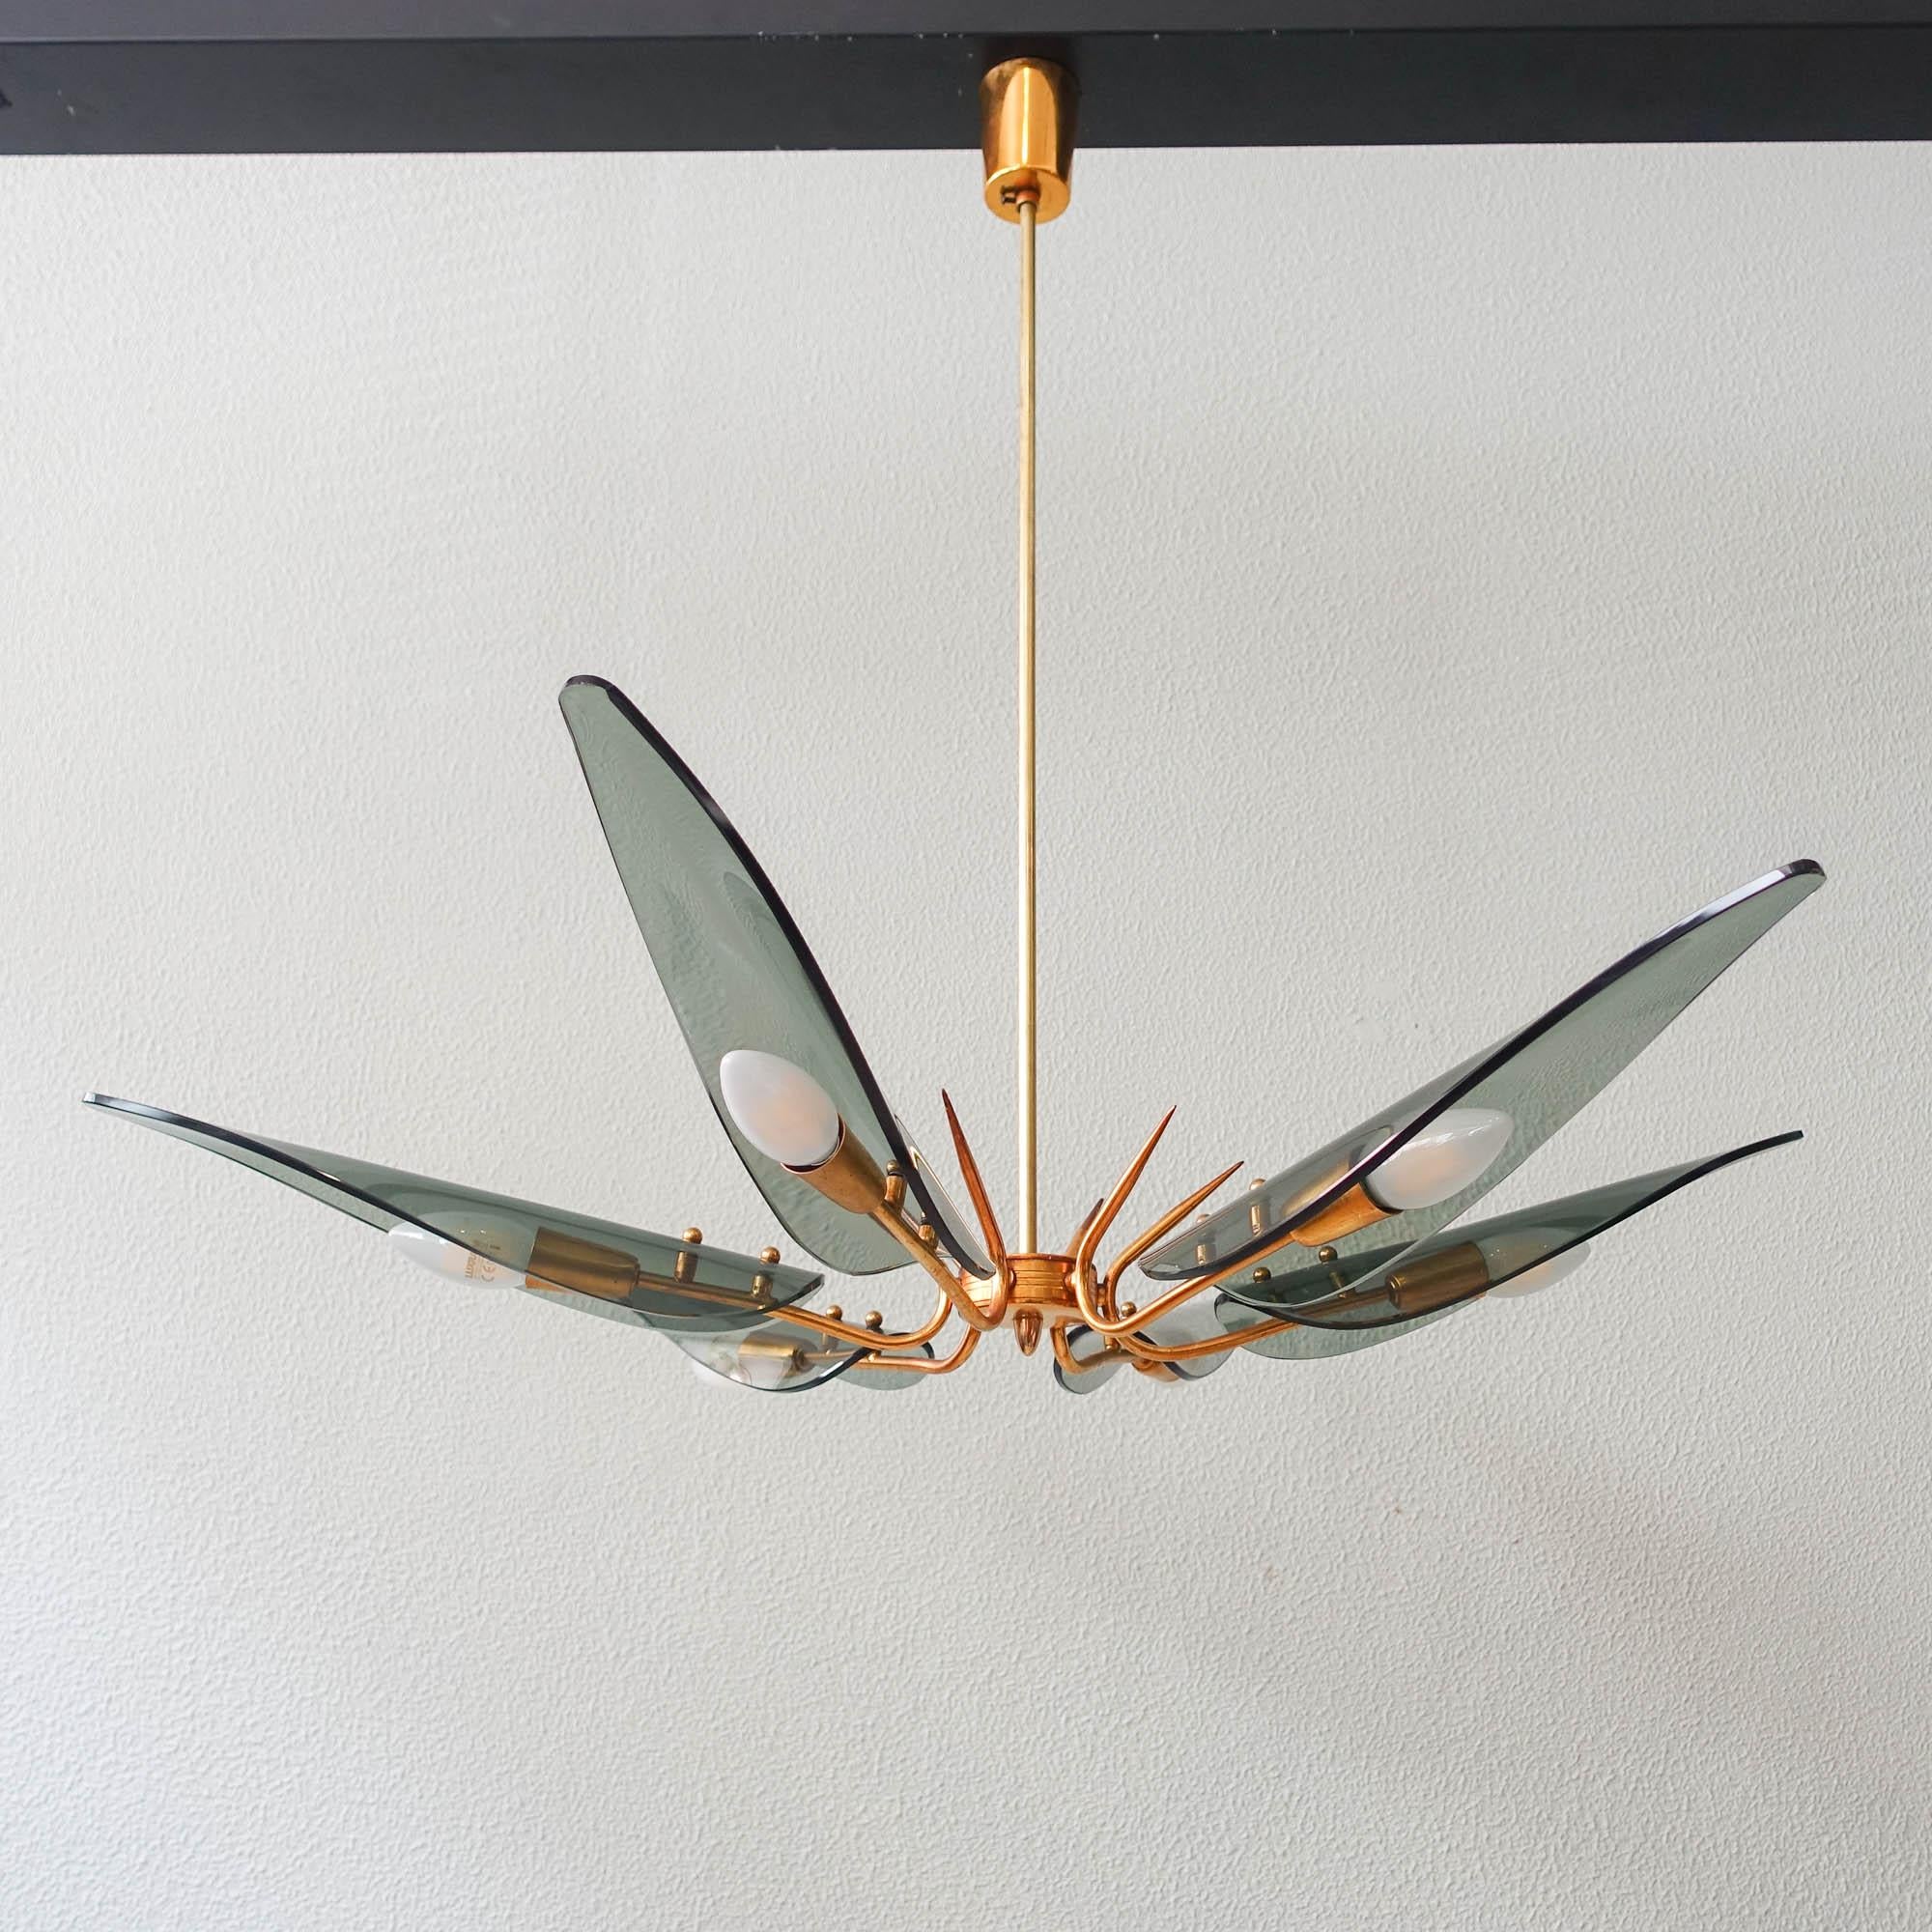 Italian Vintage Chandelier in the Style of Max Ingrand for Fontana Arte, 1950s For Sale